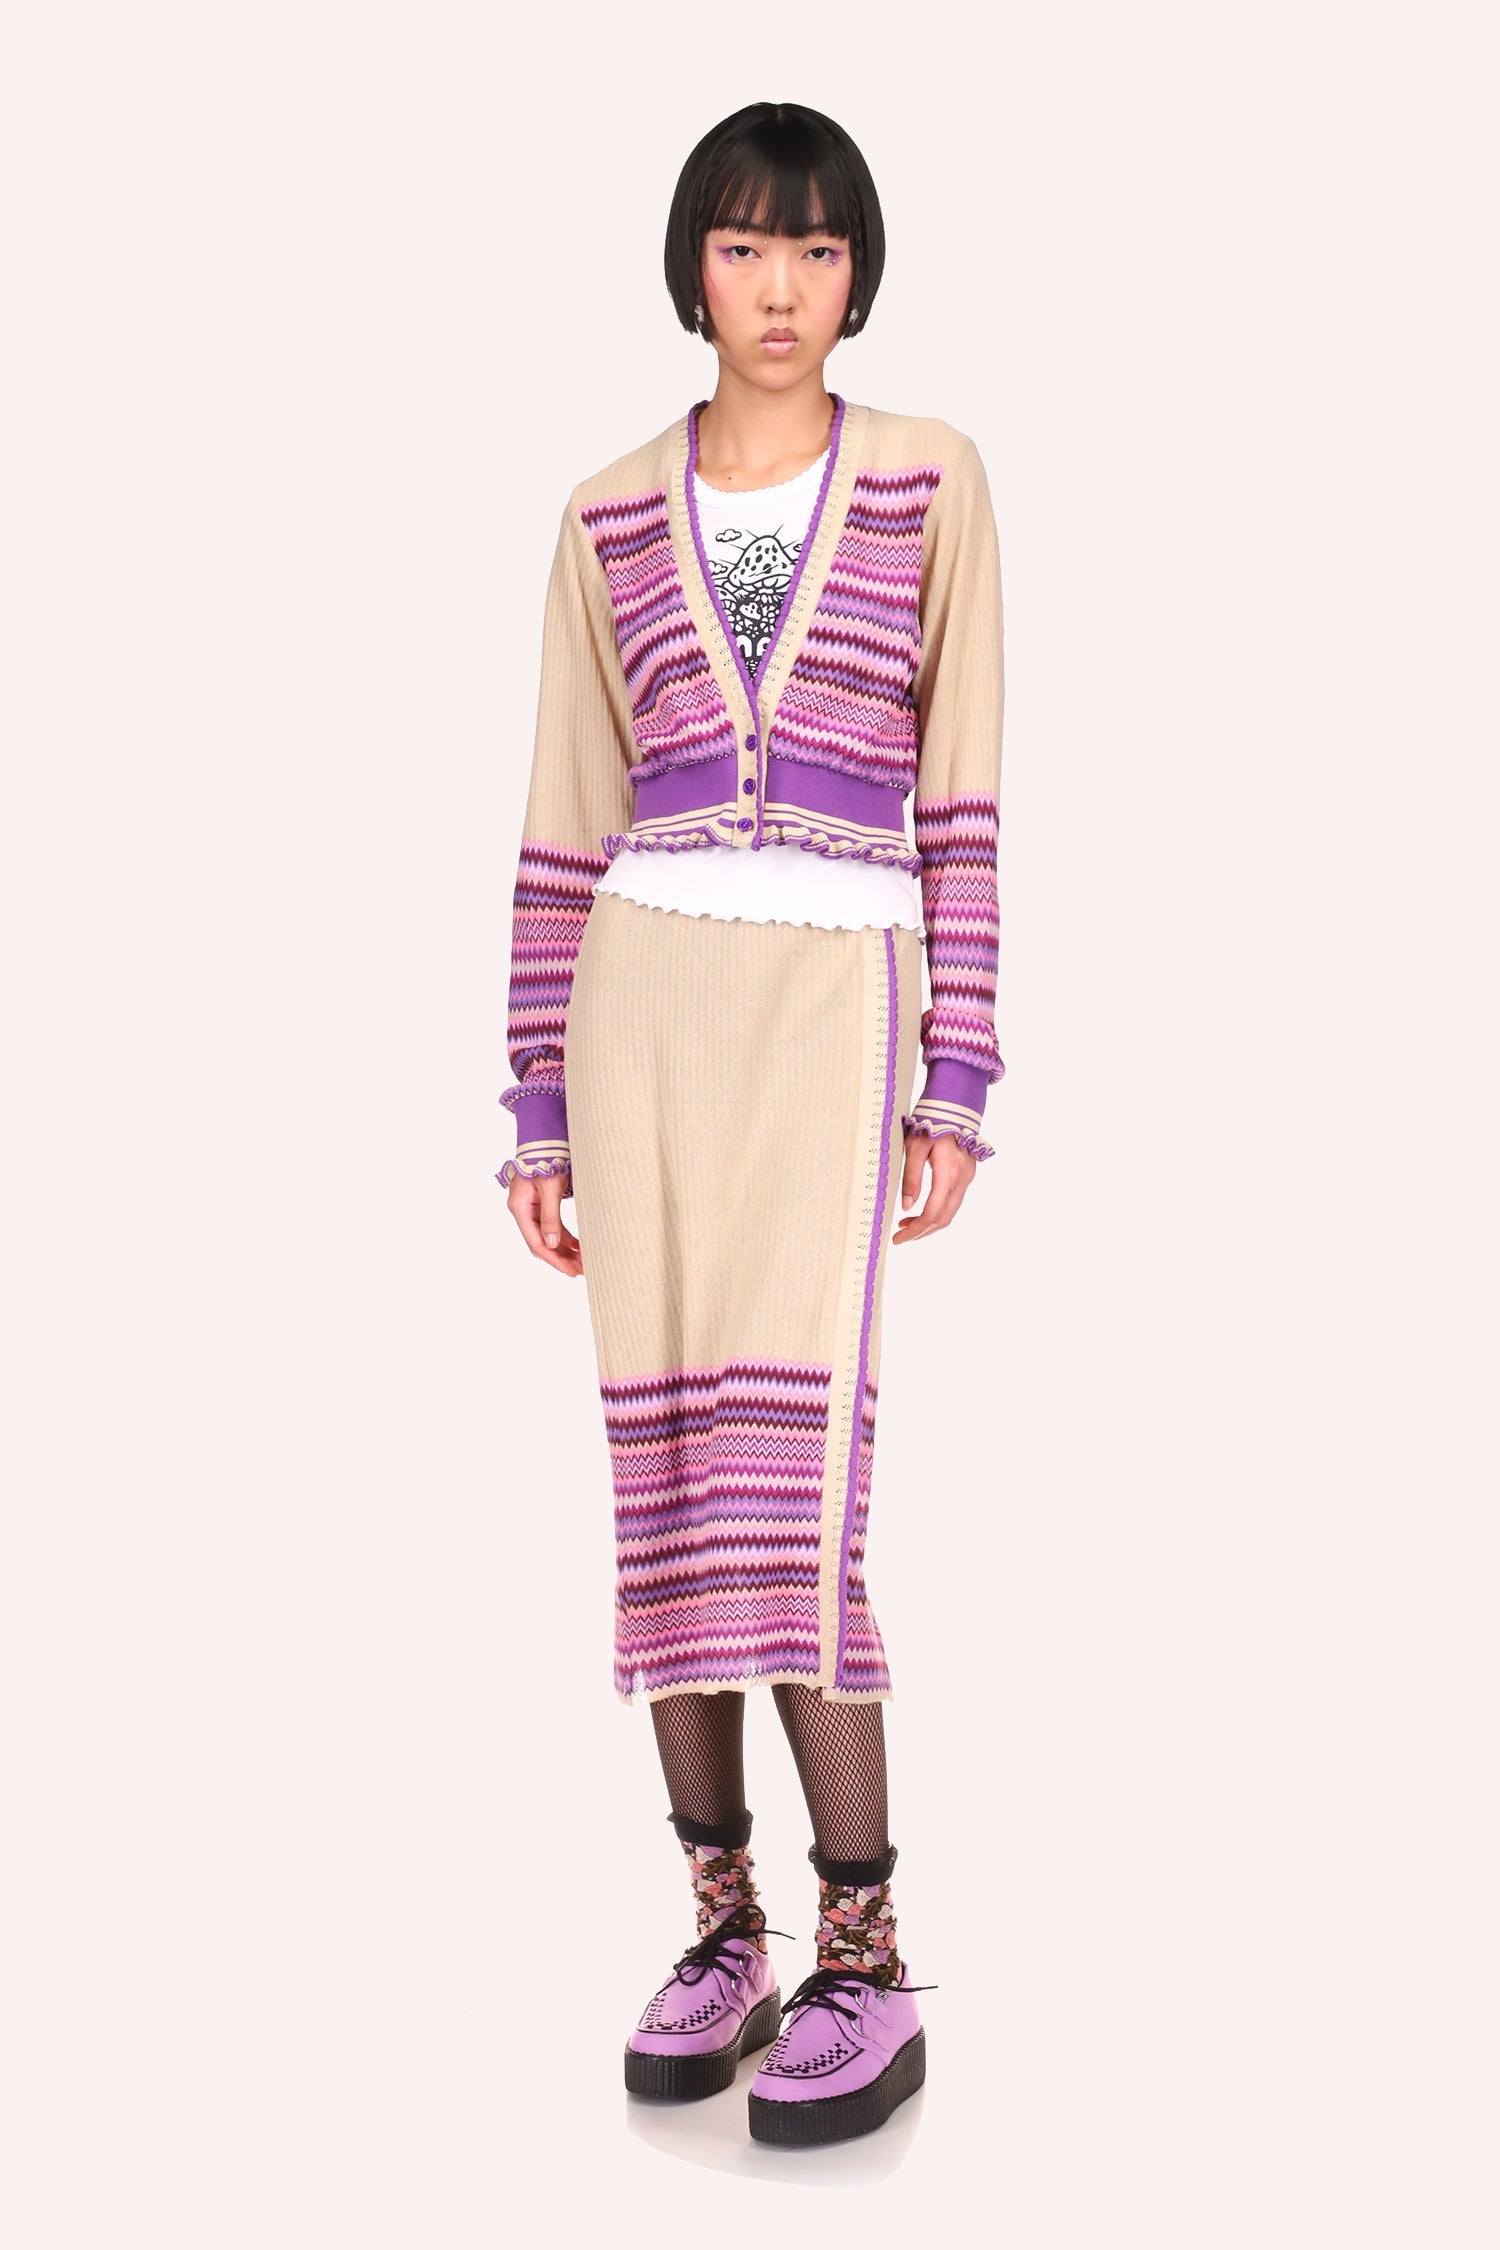 Tonal Zigzag Skirt lavender perfect match for Tonal Zigzag Cropped Cardigan lavender